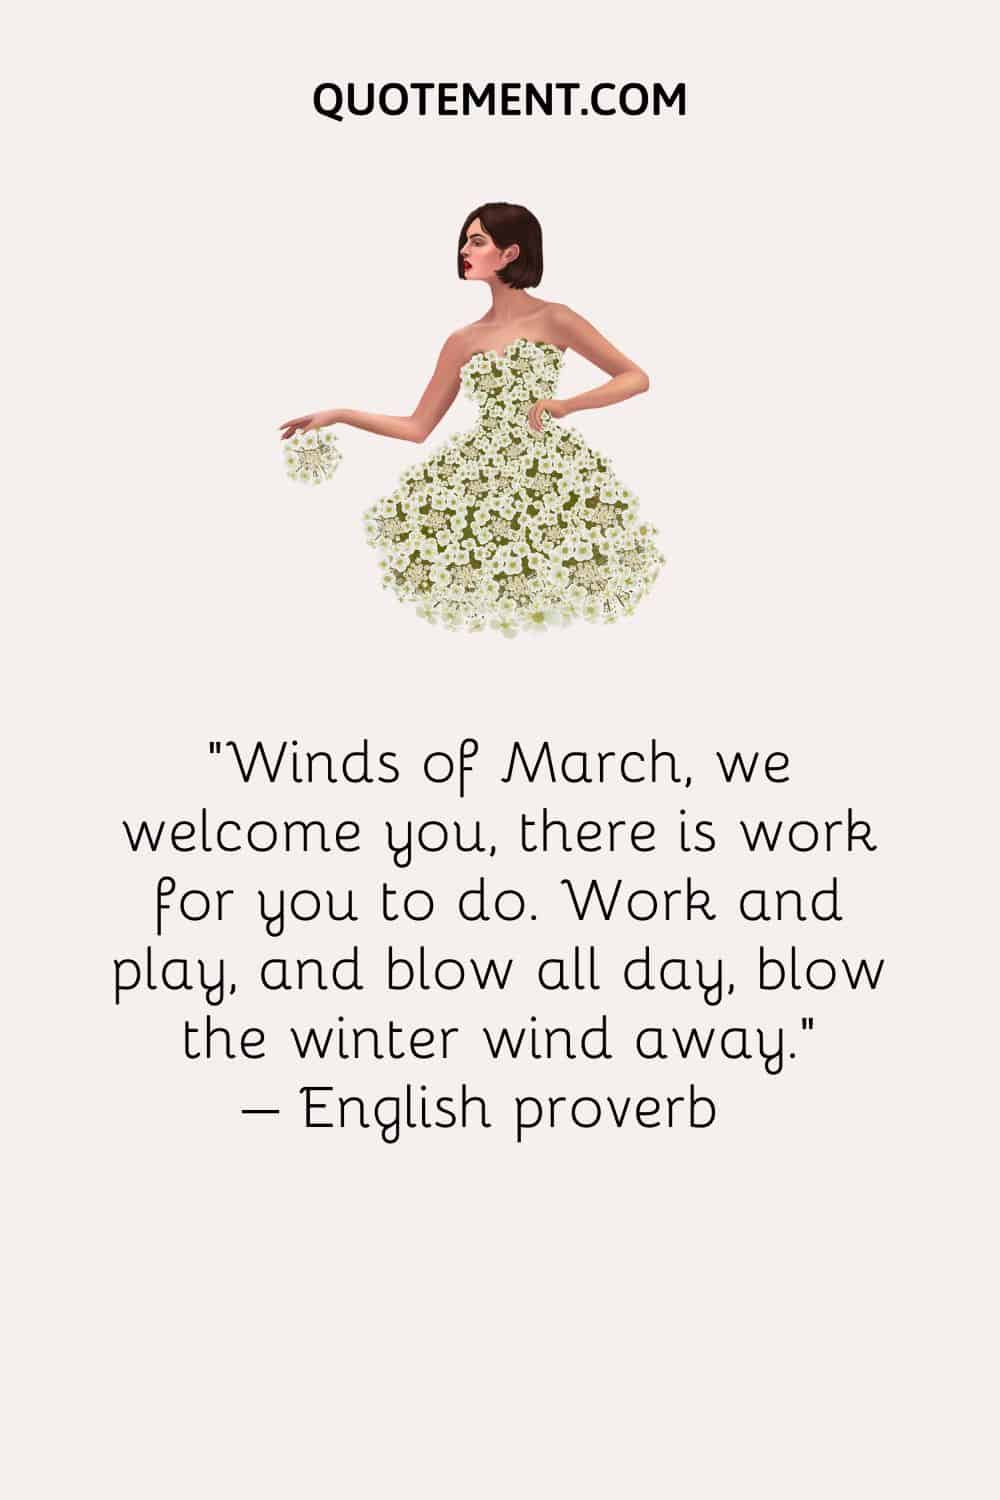 Winds of March, we welcome you, there is work for you to do. Work and play, and blow all day, blow the winter wind away. – English proverb